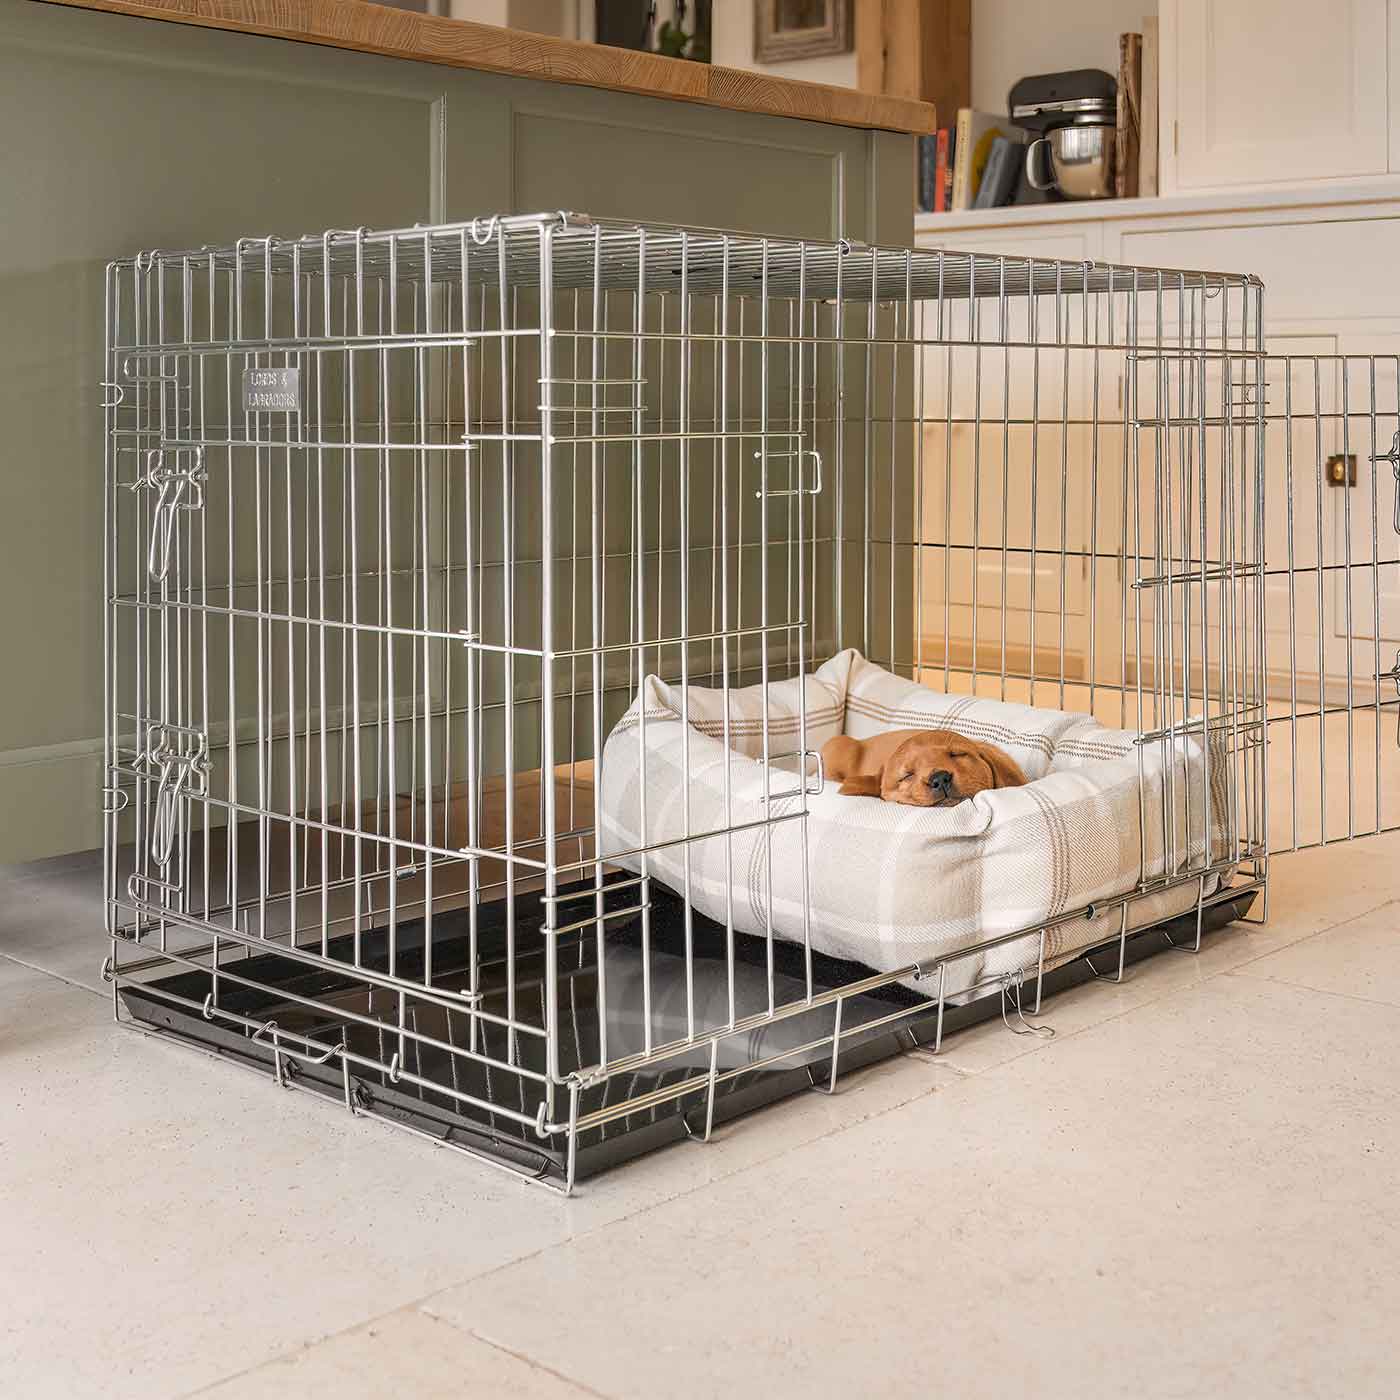 [color:natural tweed] Cozy & Calming Puppy Cage Bed, The Perfect Dog Cage Accessory For The Ultimate Dog Den! In Stunning Balmoral Natural Tweed! Now Available to Personalize at Lords & Labradors US